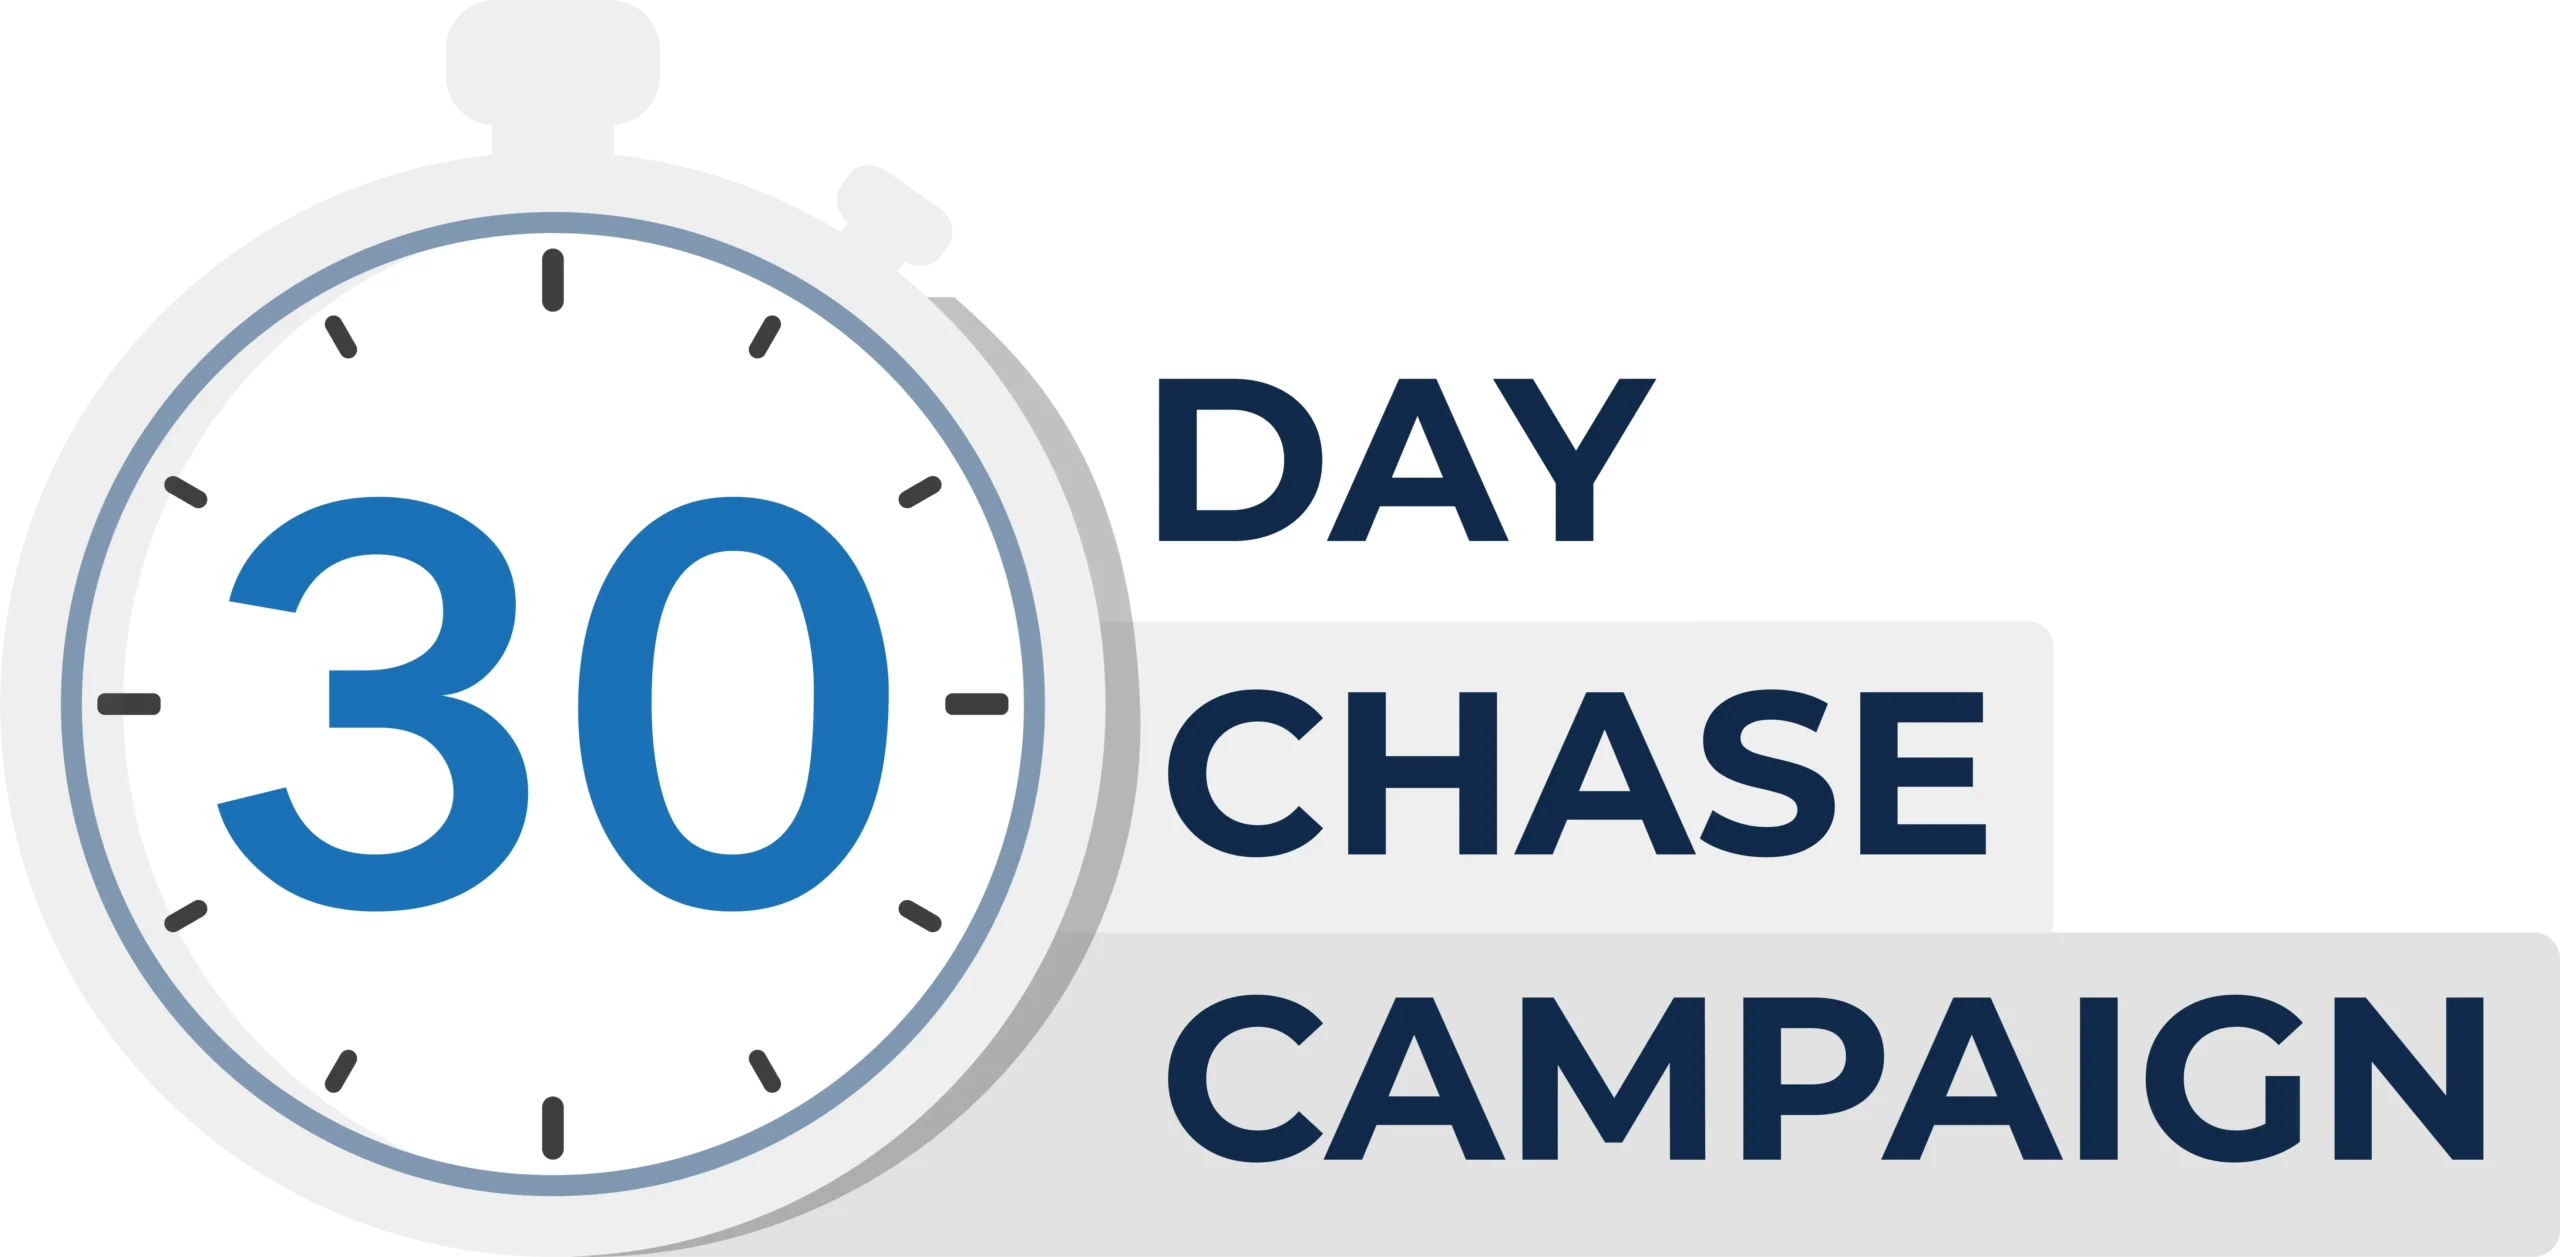 30 day Chase Campaign Icon